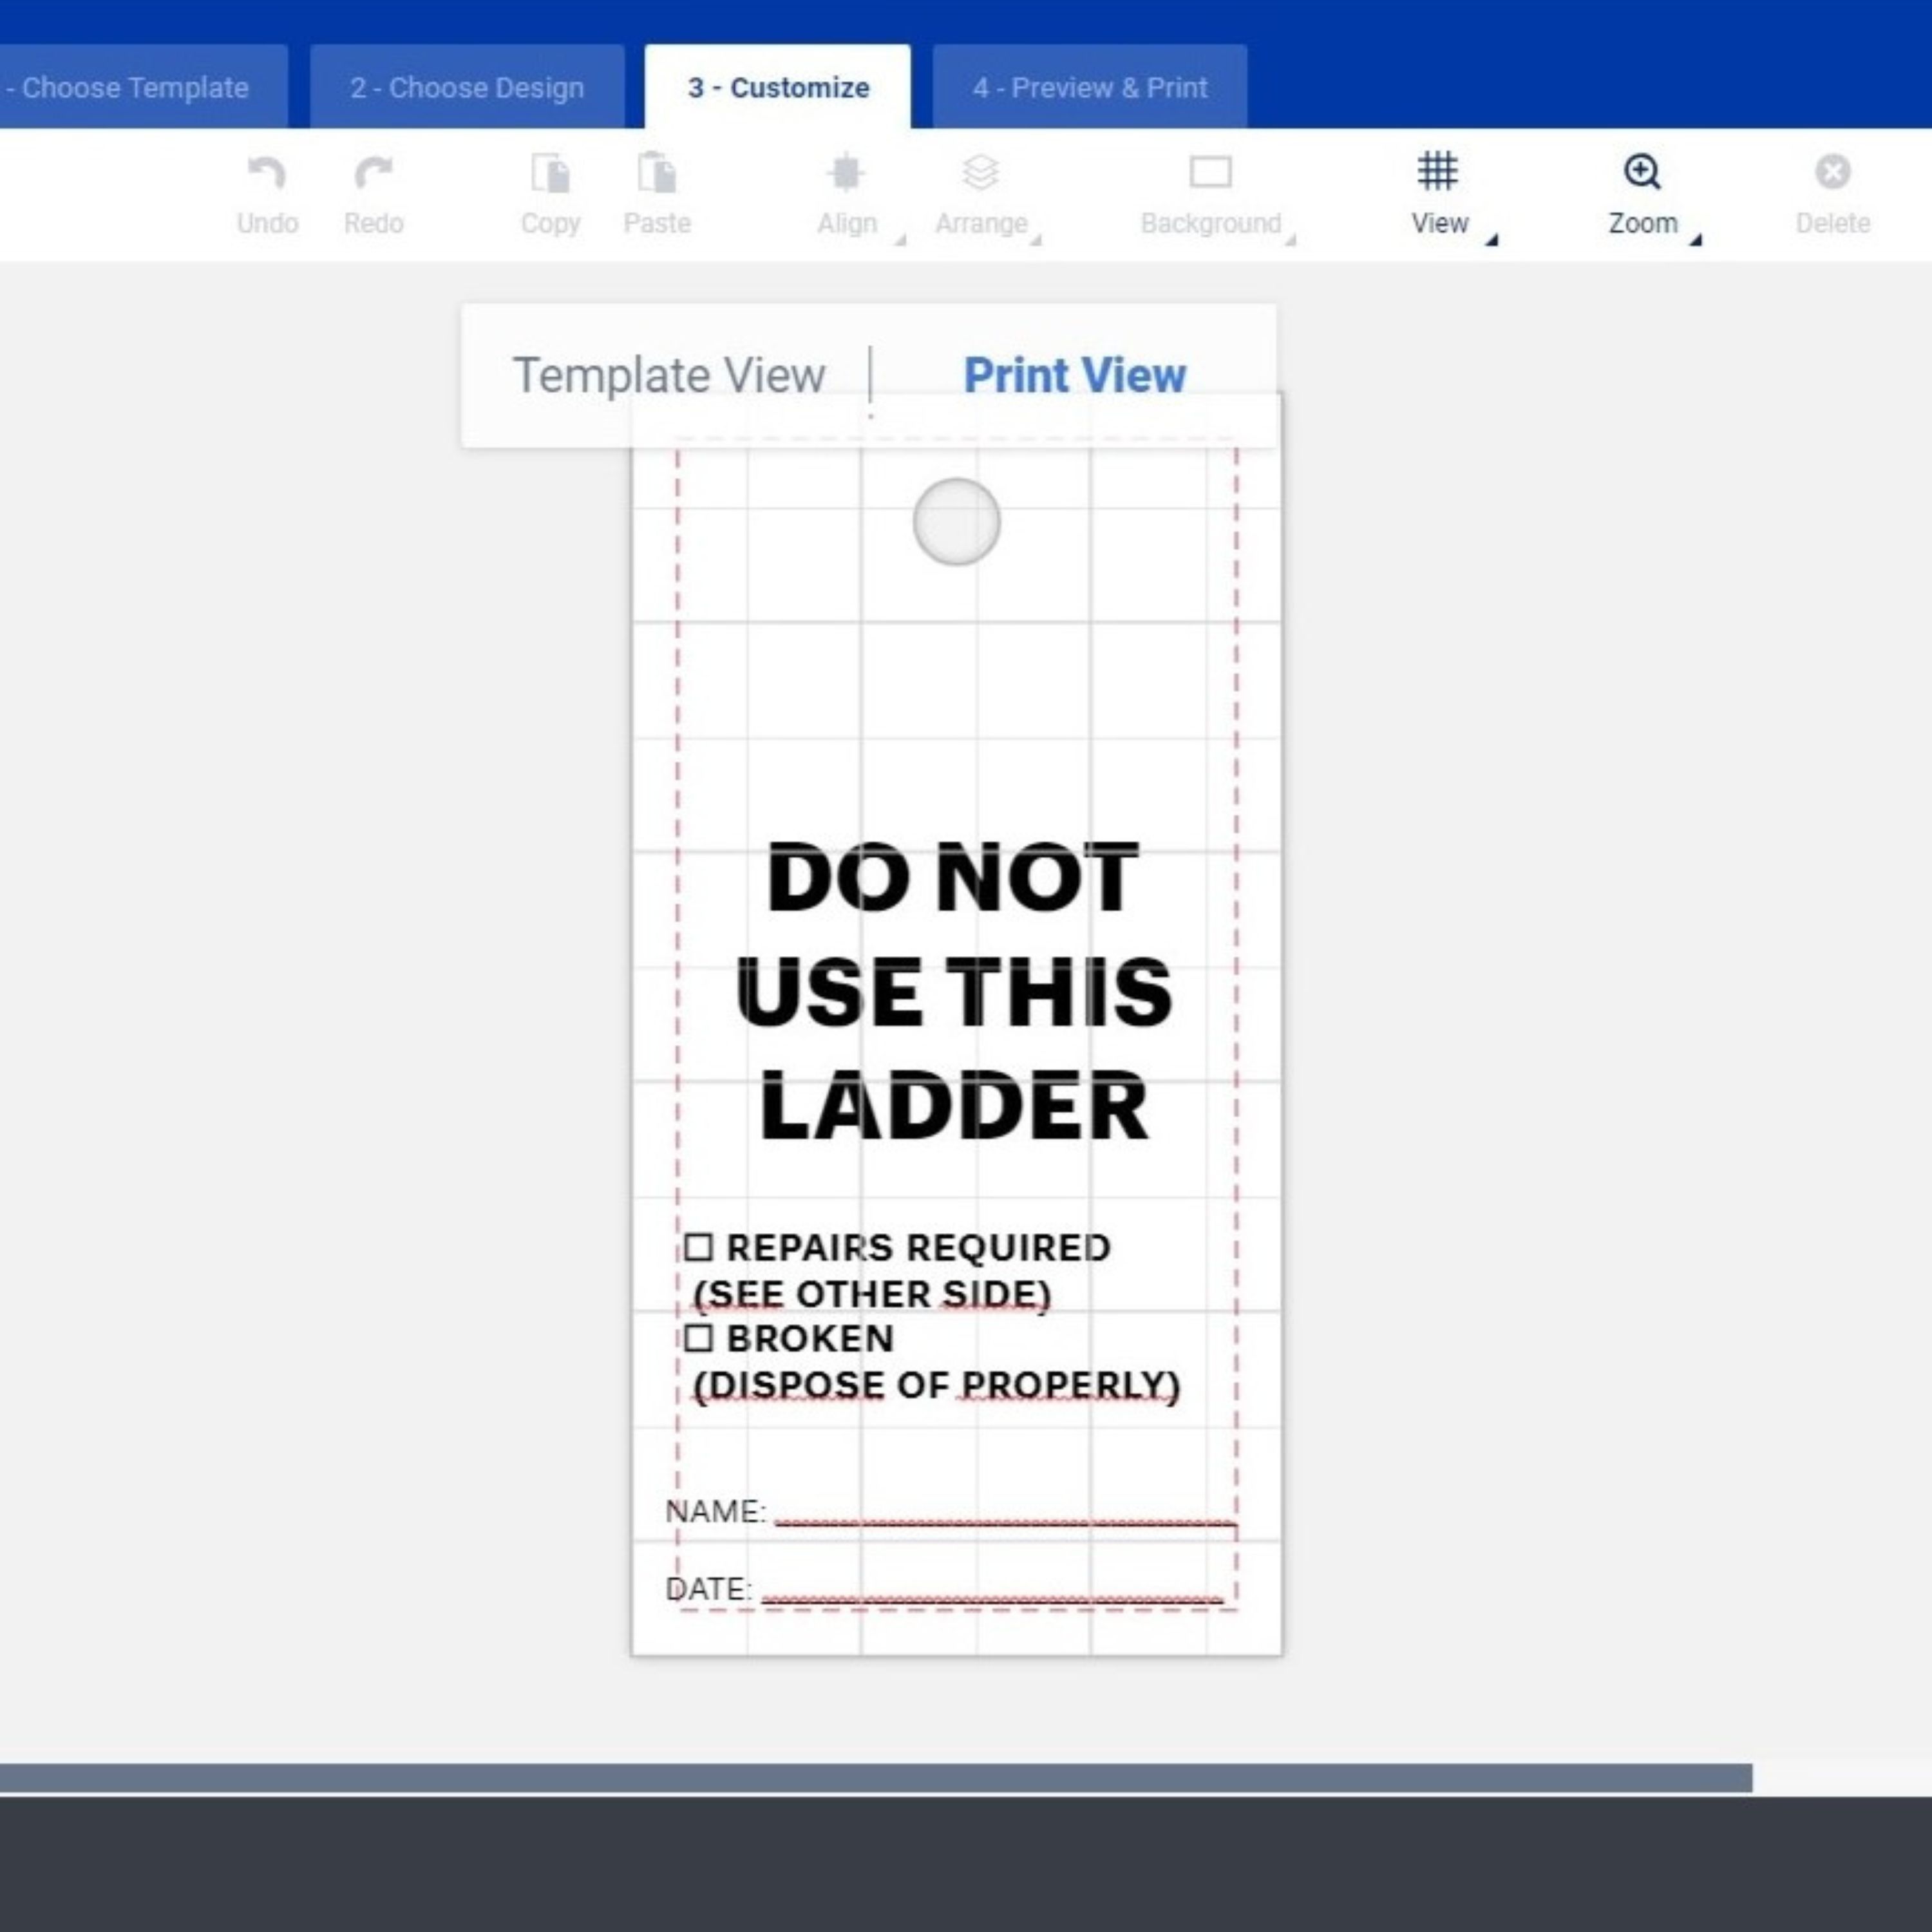 An example of what templates look like for Avery tags that come with a preprinted OSHA "Danger" header. The screenshot shows that you can view the design with the preprinted header (Template View) and without it (Print View). The print view lets you see only what will be printed. 